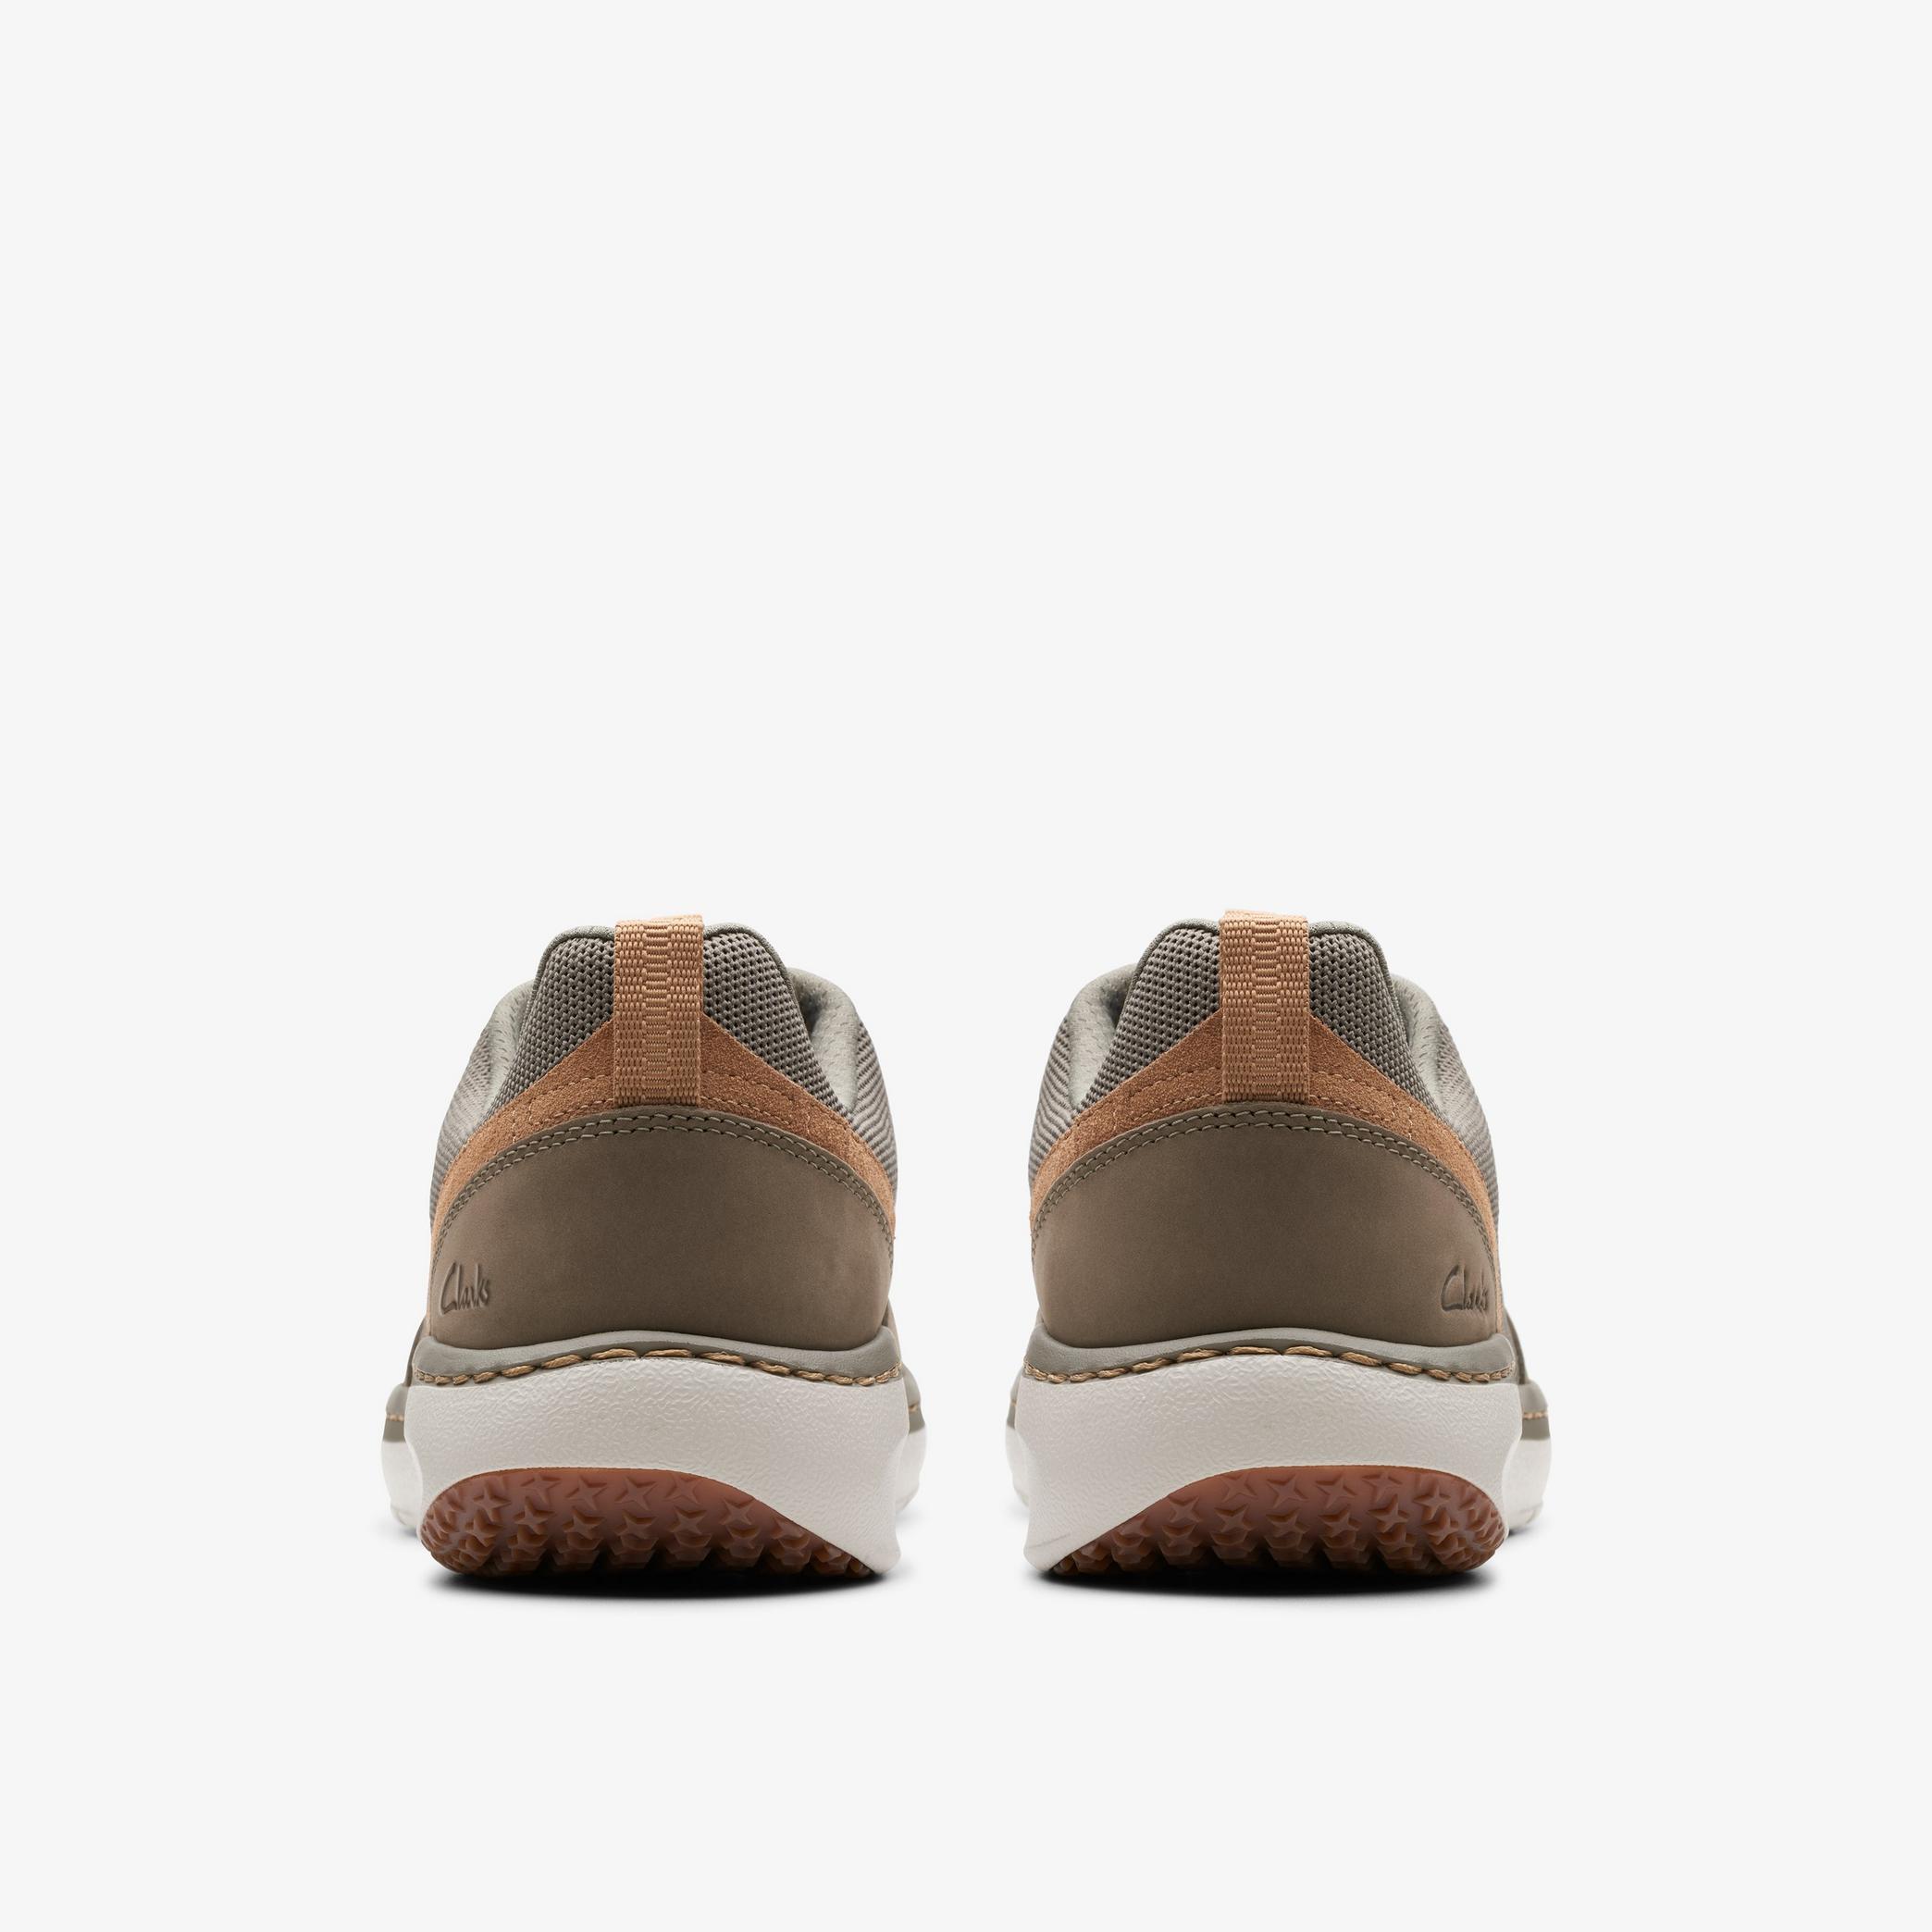 MENS Clarks Pro Knit Stone Combination Sneakers | Clarks US